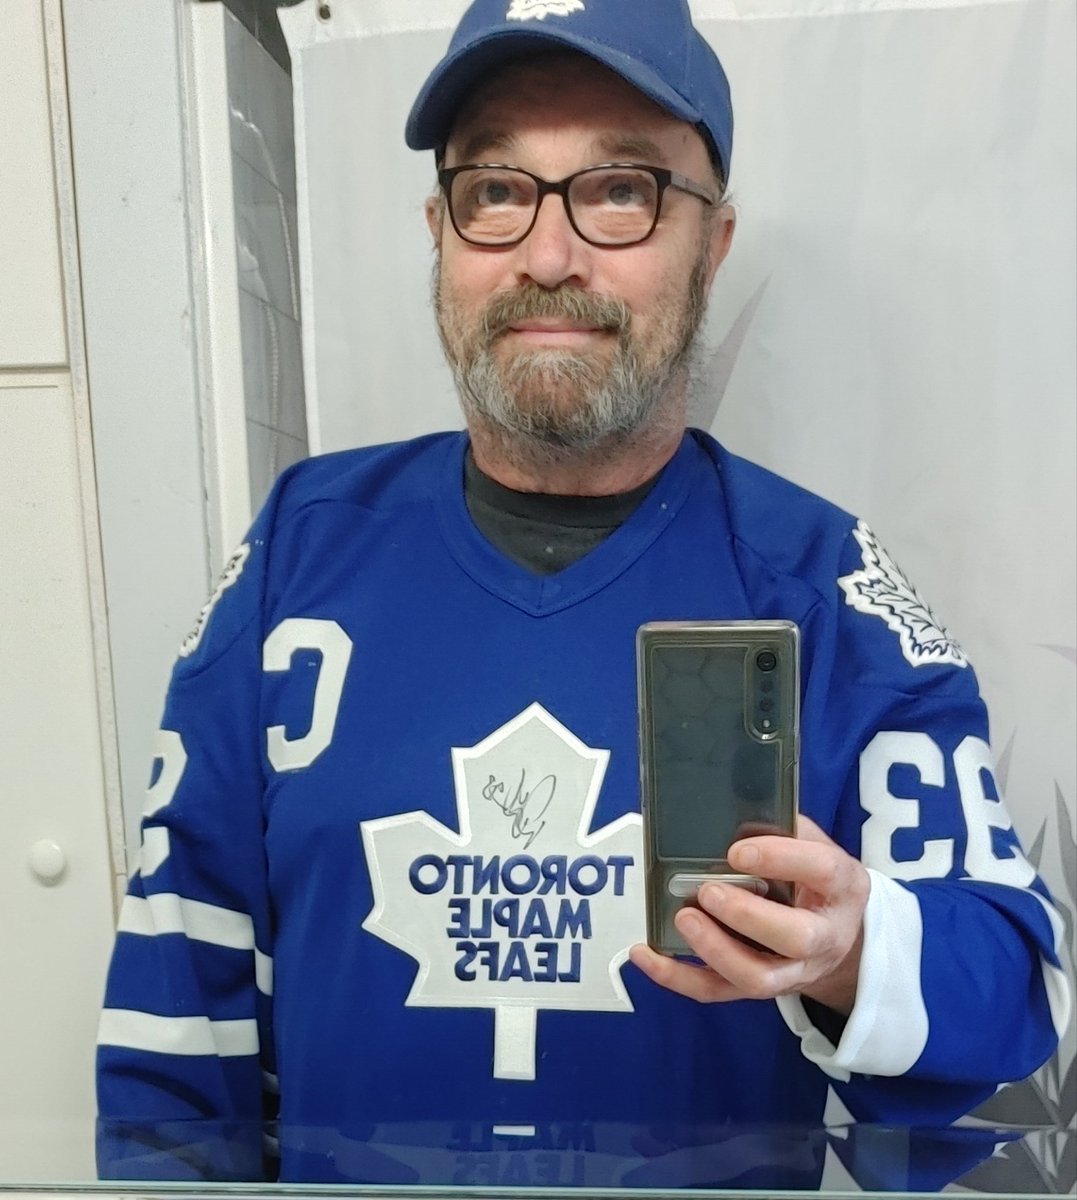 @douggilmour @MapleLeafs I only don this jersey on special occasions , GAME 7 vs Boston is a SPECIAL OCASSION. @douggilmour #LeafsForever #LeafsNation #GoLeafsGo #BRINGTHEPASSION